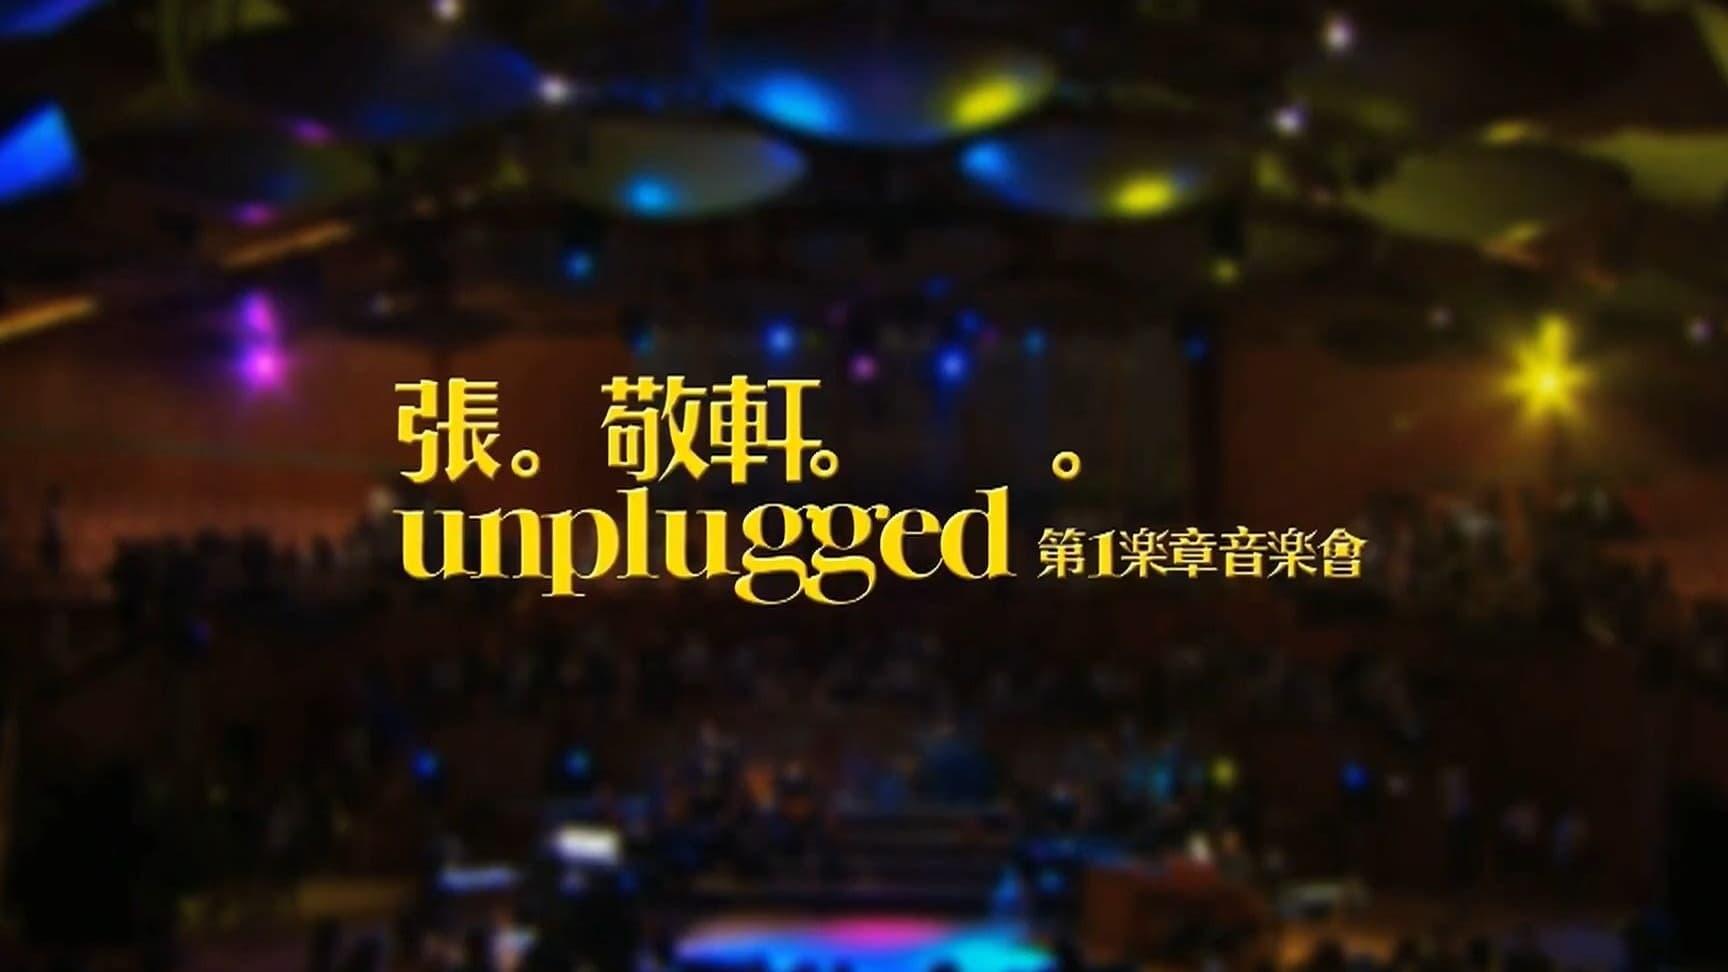 Hins Cheung 1st Unplugged Concert backdrop